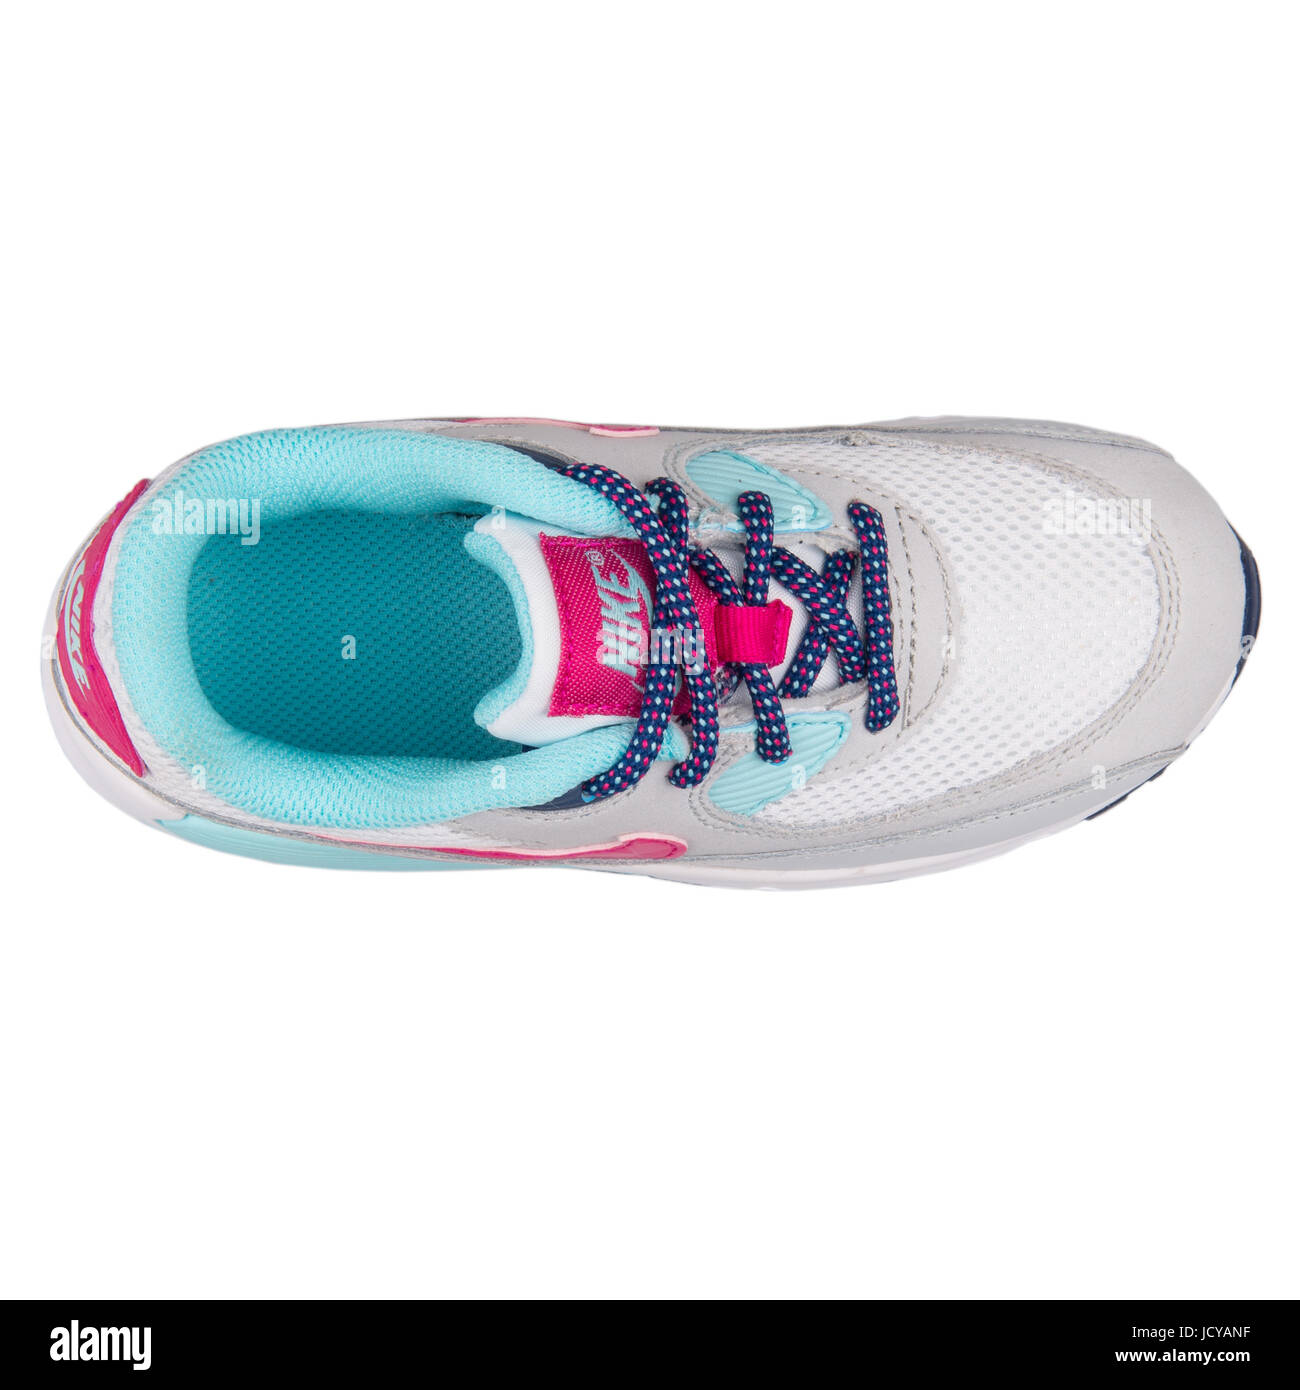 Nike Air Max 90 Mesh (TD) White, Grey, Pink and Turquoise Toddler's Running  Shoes - 724857-102 Stock Photo - Alamy